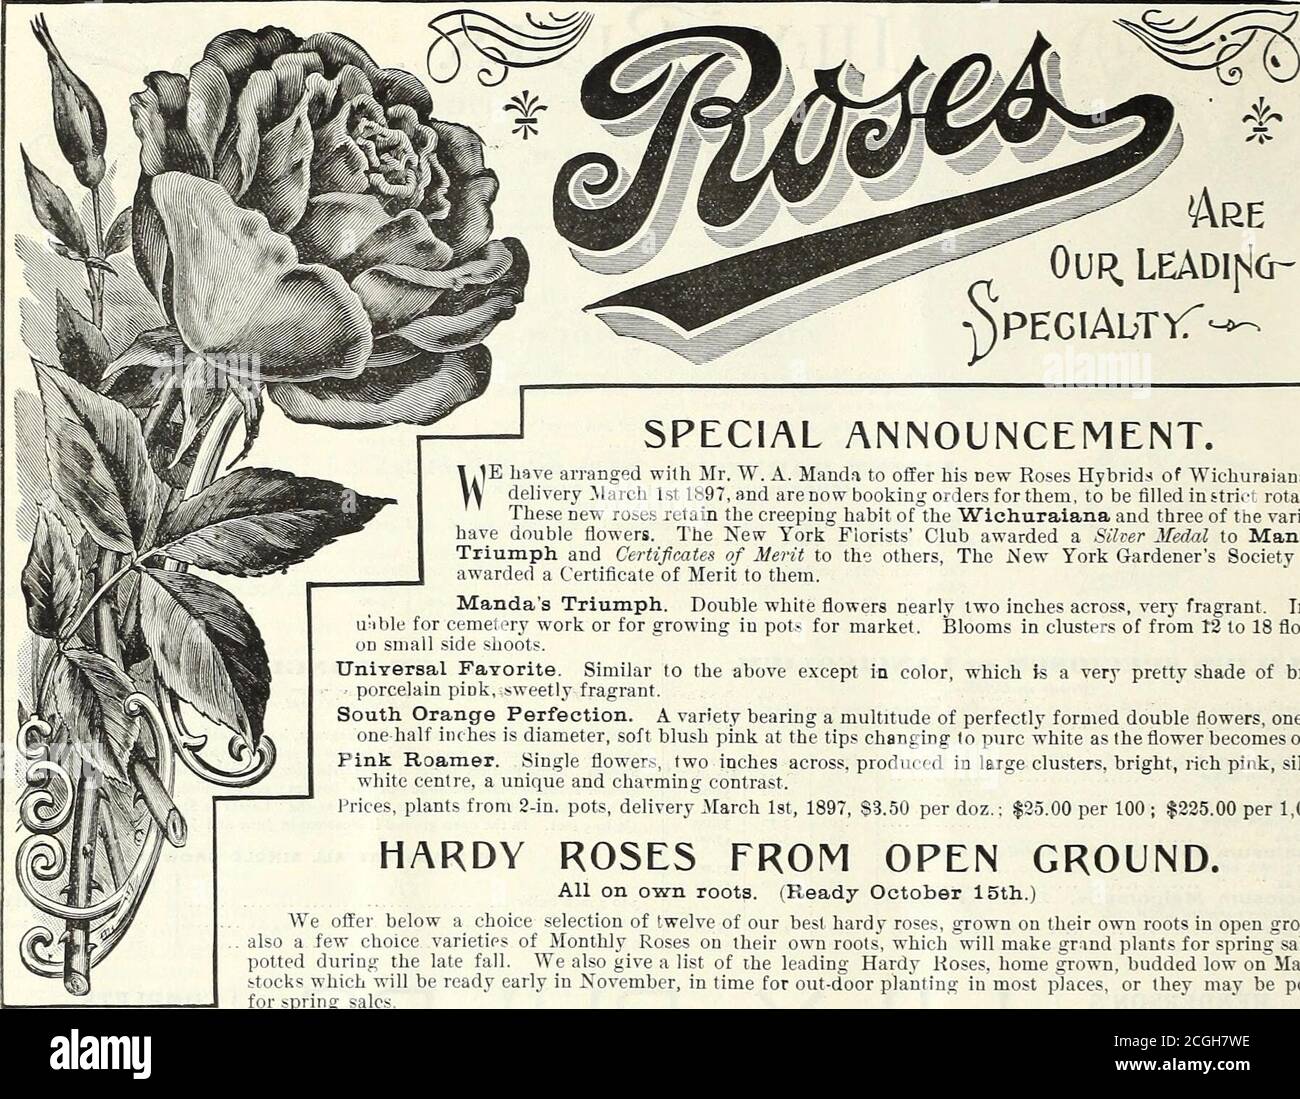 . Peter Henderson & Co.'s wholesale catalogue of bulbs, plants and flower seeds for autumn planting : 1896 . ful, scarlet Testaceum. (See Isabellianum.) Thunbergianum. (See Elegans.) Tigrinum. The well-known Tiger Lily Splendens. Orange red, spotted black, lar^e Flora Plena. Double flowers, orange, red spots. , Turban. (See Pomponicum ). Turks Cap. (See Superbum ) Umbellatum. tSee Elegans.) Wallacel. Orange, dotted maroon Wash i ngton lanu m. White, tinged lilac and purple.  ach. Doz. 100 • 25 $2.50 $18.OO •75 7.50 SS^oo .60 6.00 45.00 .20 2.00 H.oo •25 2.50 18 00 .20 1^75 12.00 .30 3.00 2O.0 Stock Photo